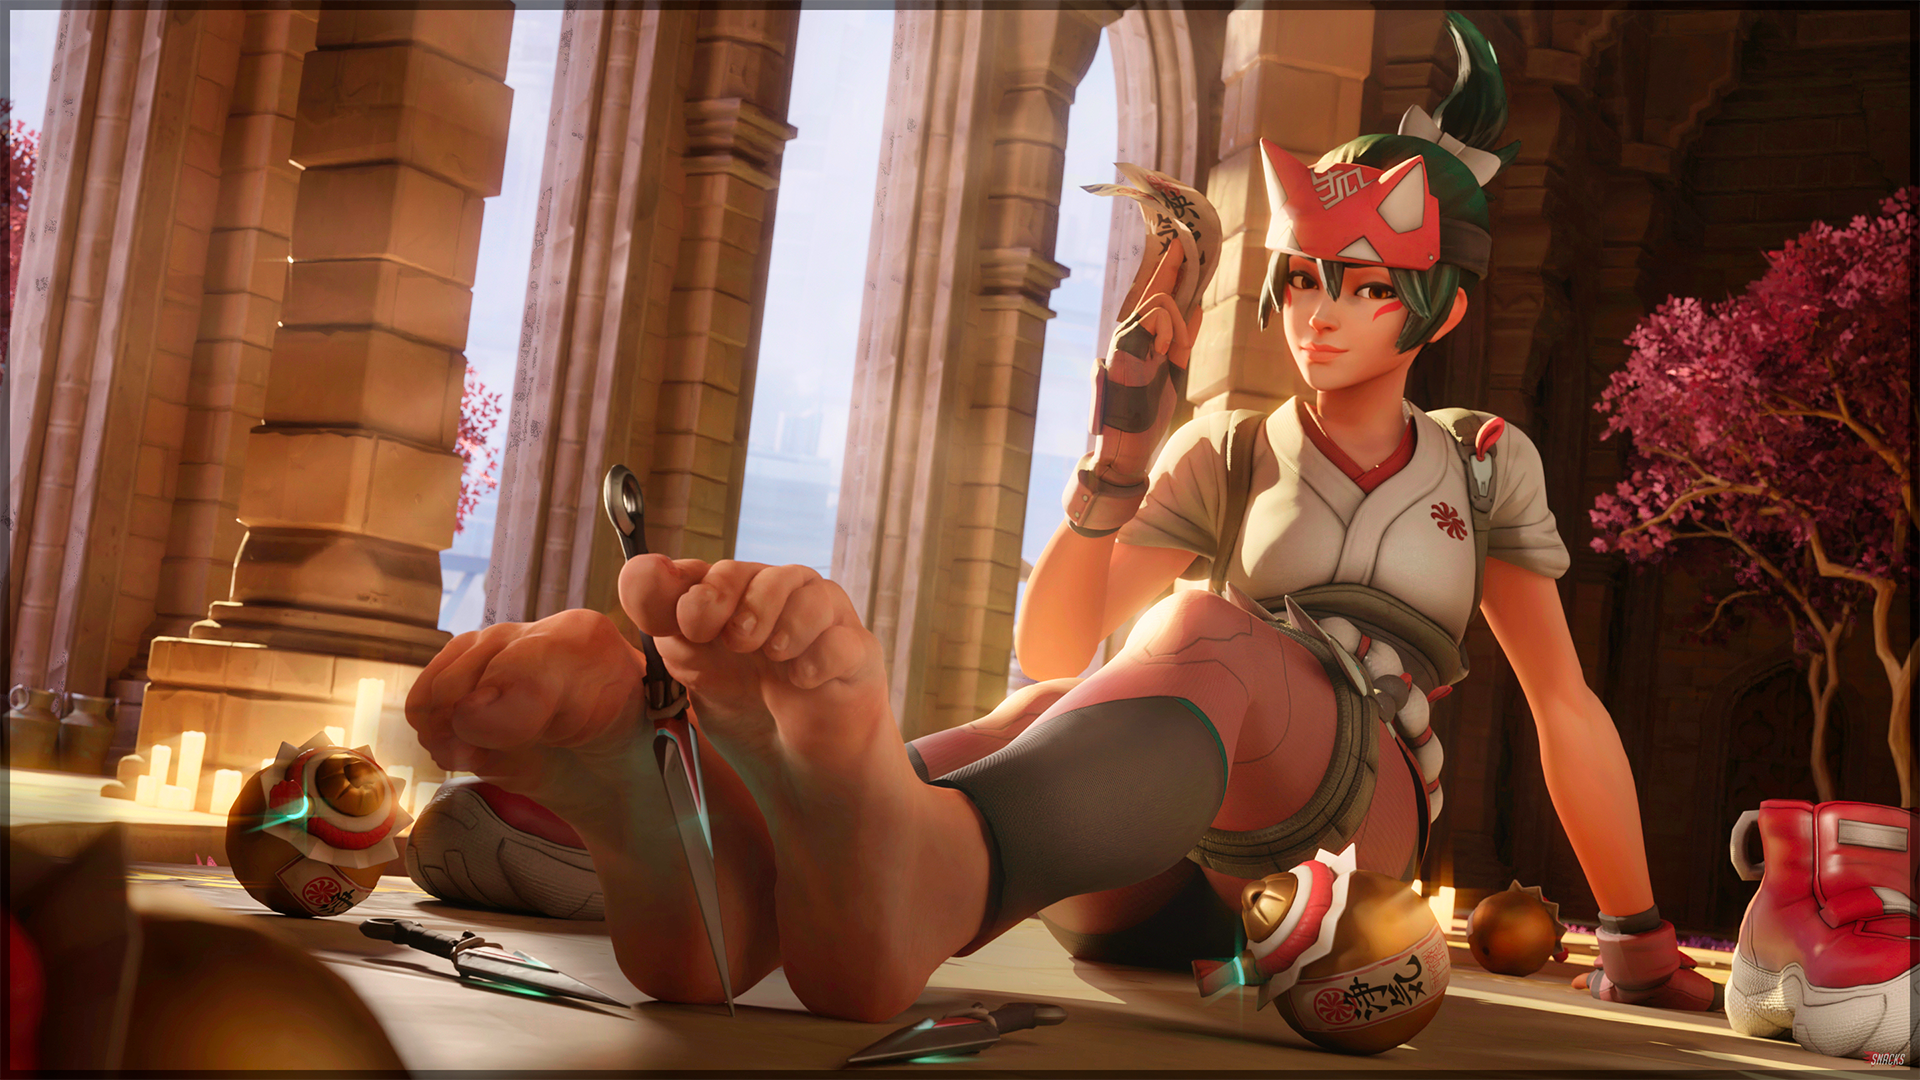 The Ultimate Overwatch Feet Fetish Collection You Cannot Miss